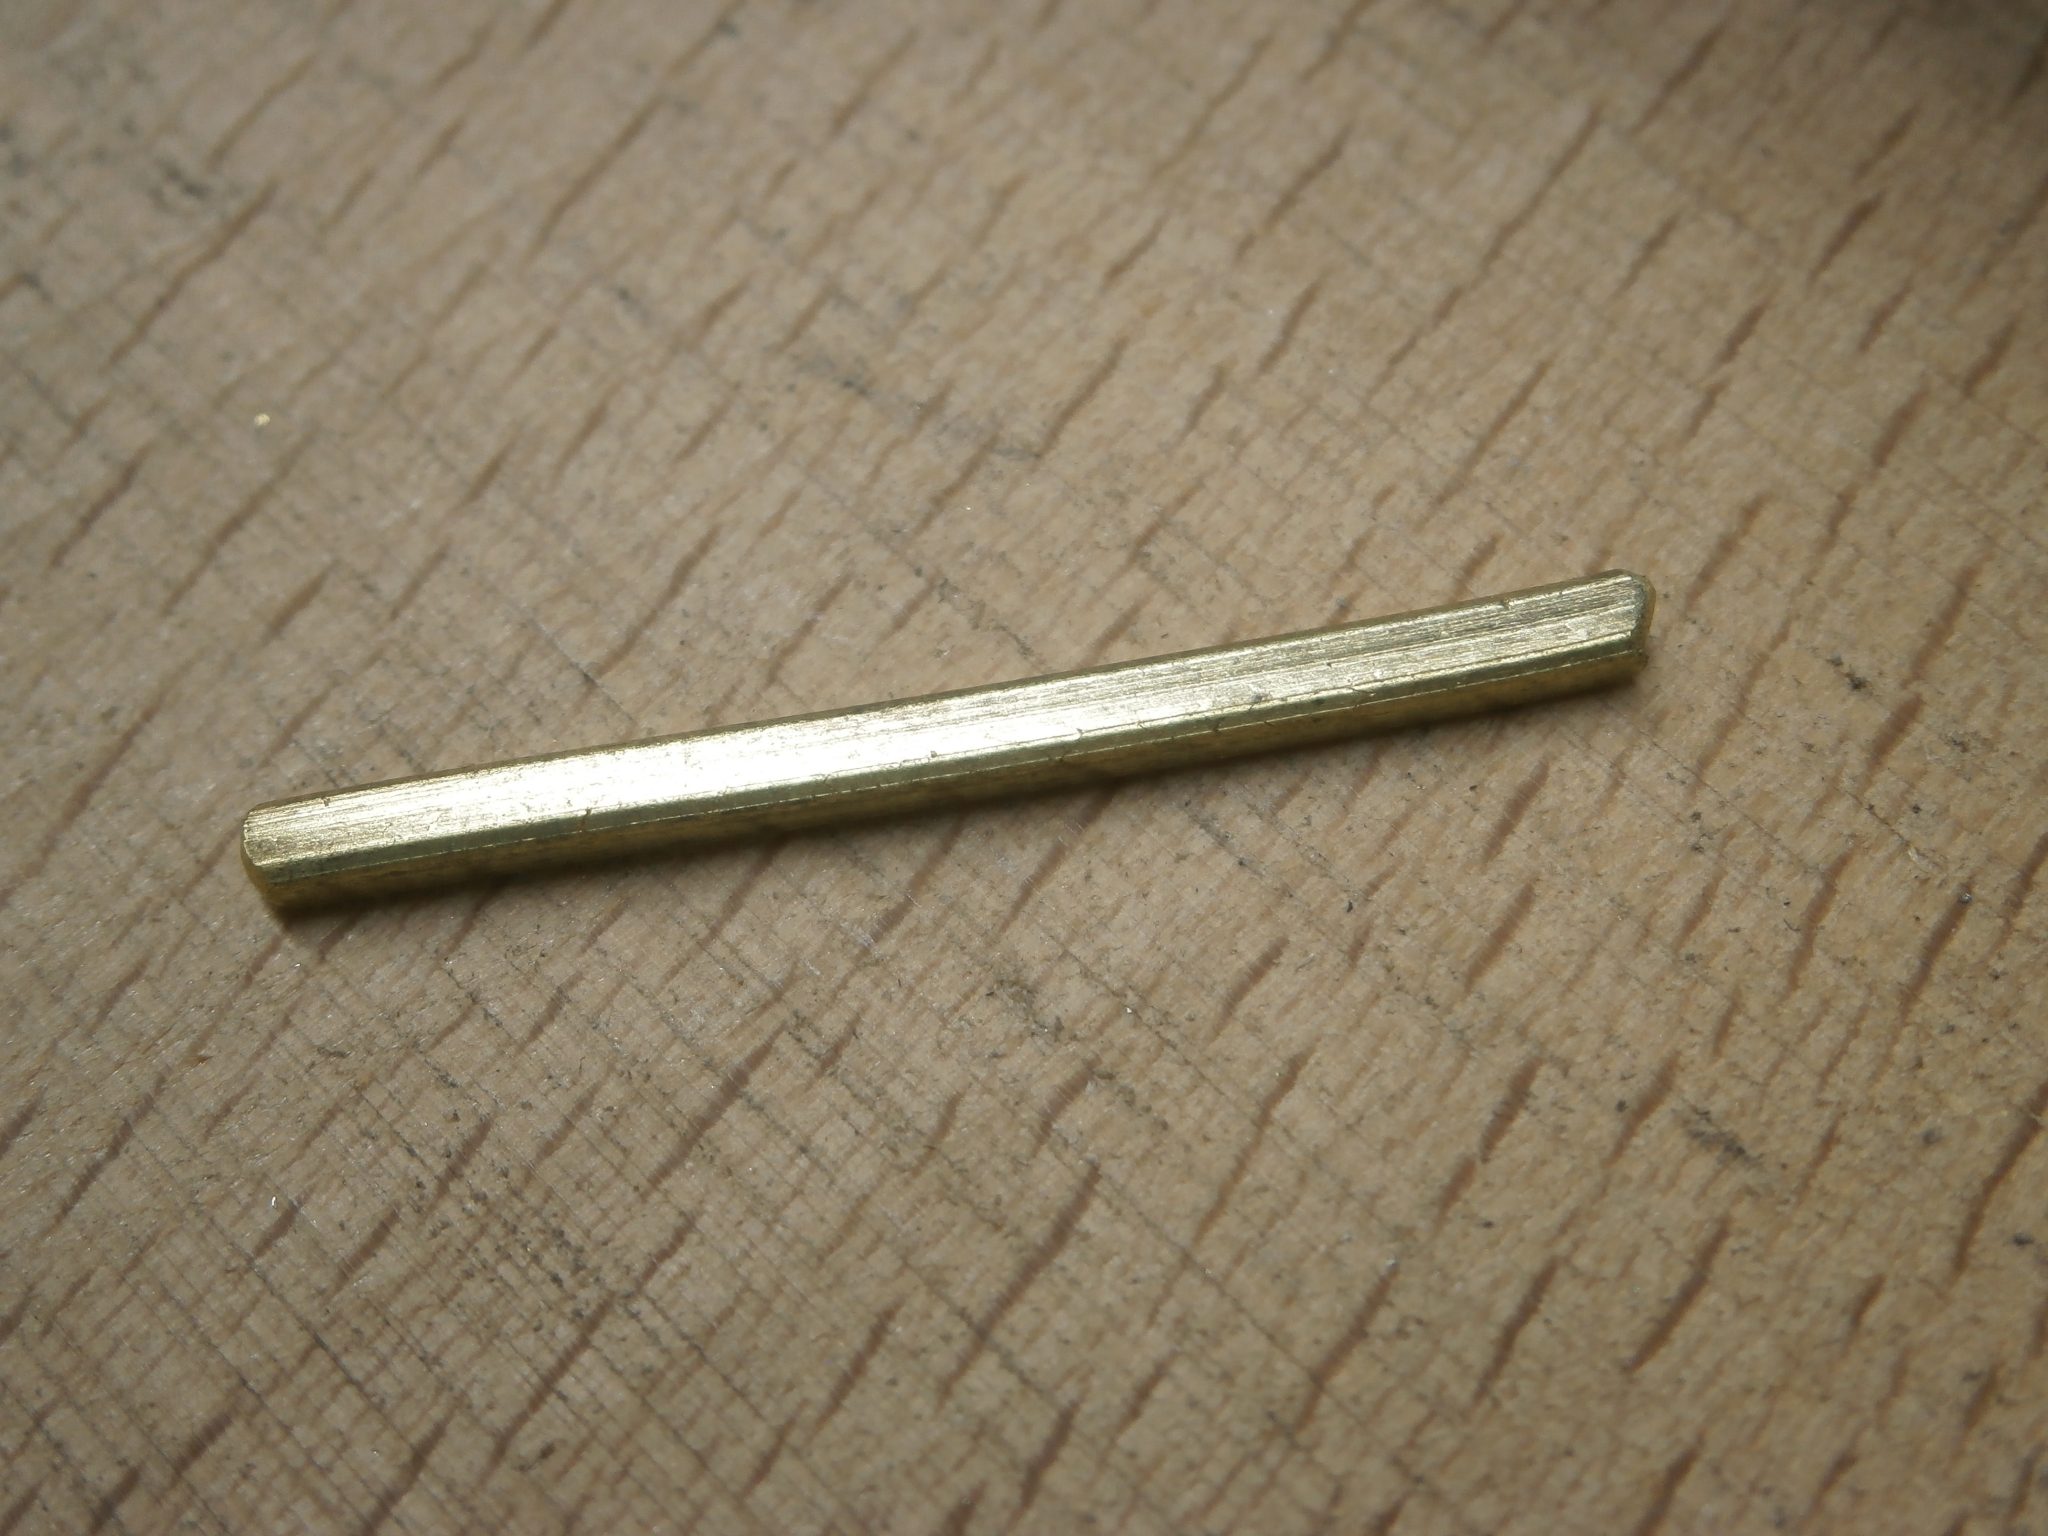 New 18ct gold ring shaft is milled to required length